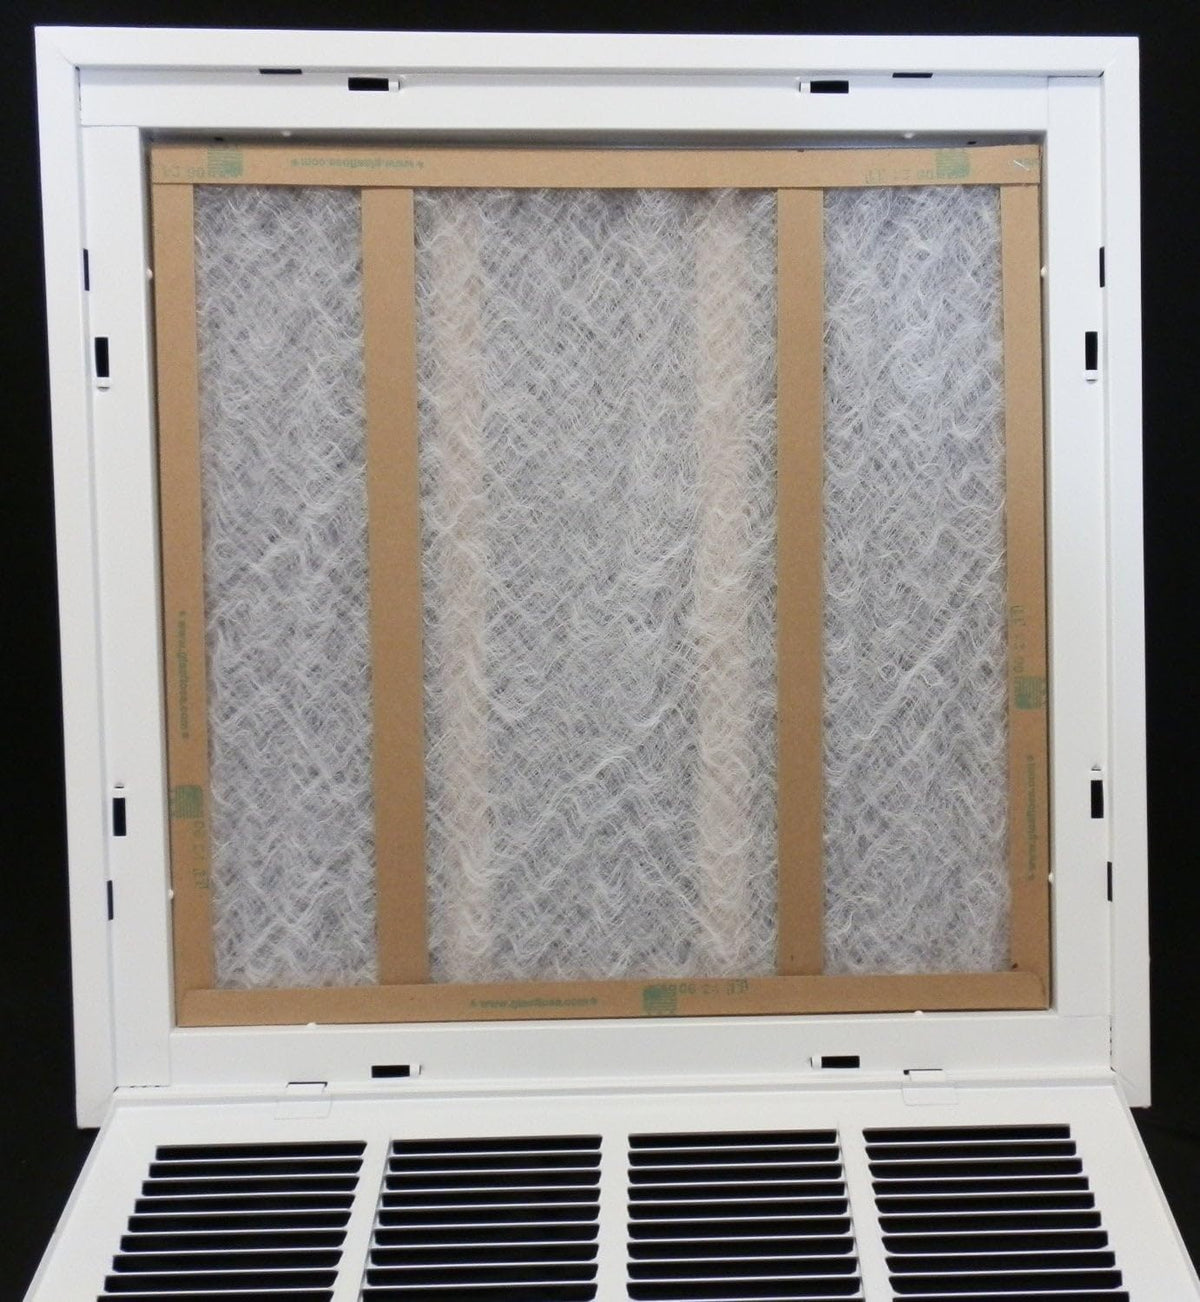 25&quot; X 36&quot; Steel Return Air Filter Grille for 1&quot; Filter - Removable Frame - [Outer Dimensions: 27 5/8&quot; X 38 5/8&quot;]